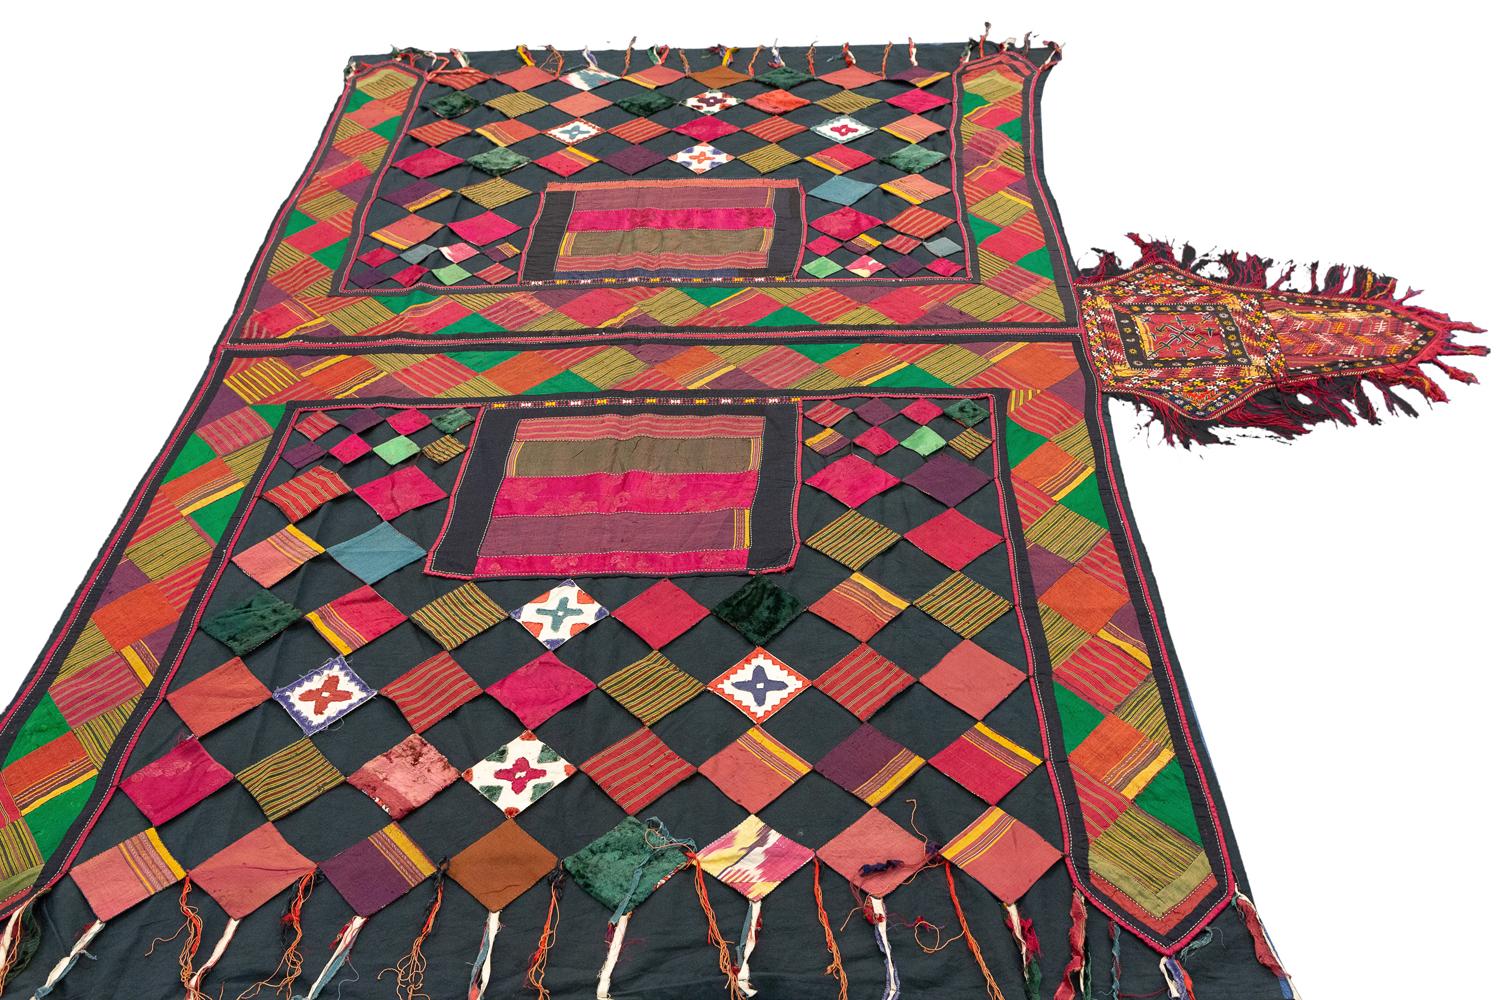 This is an antique Uzbek suzani horse cover woven during the end of the 19th century that 
Measures 160x150 in size. This piece was made using parts from different wool and silk textiles 
are woven onto the black base. This piece would have been